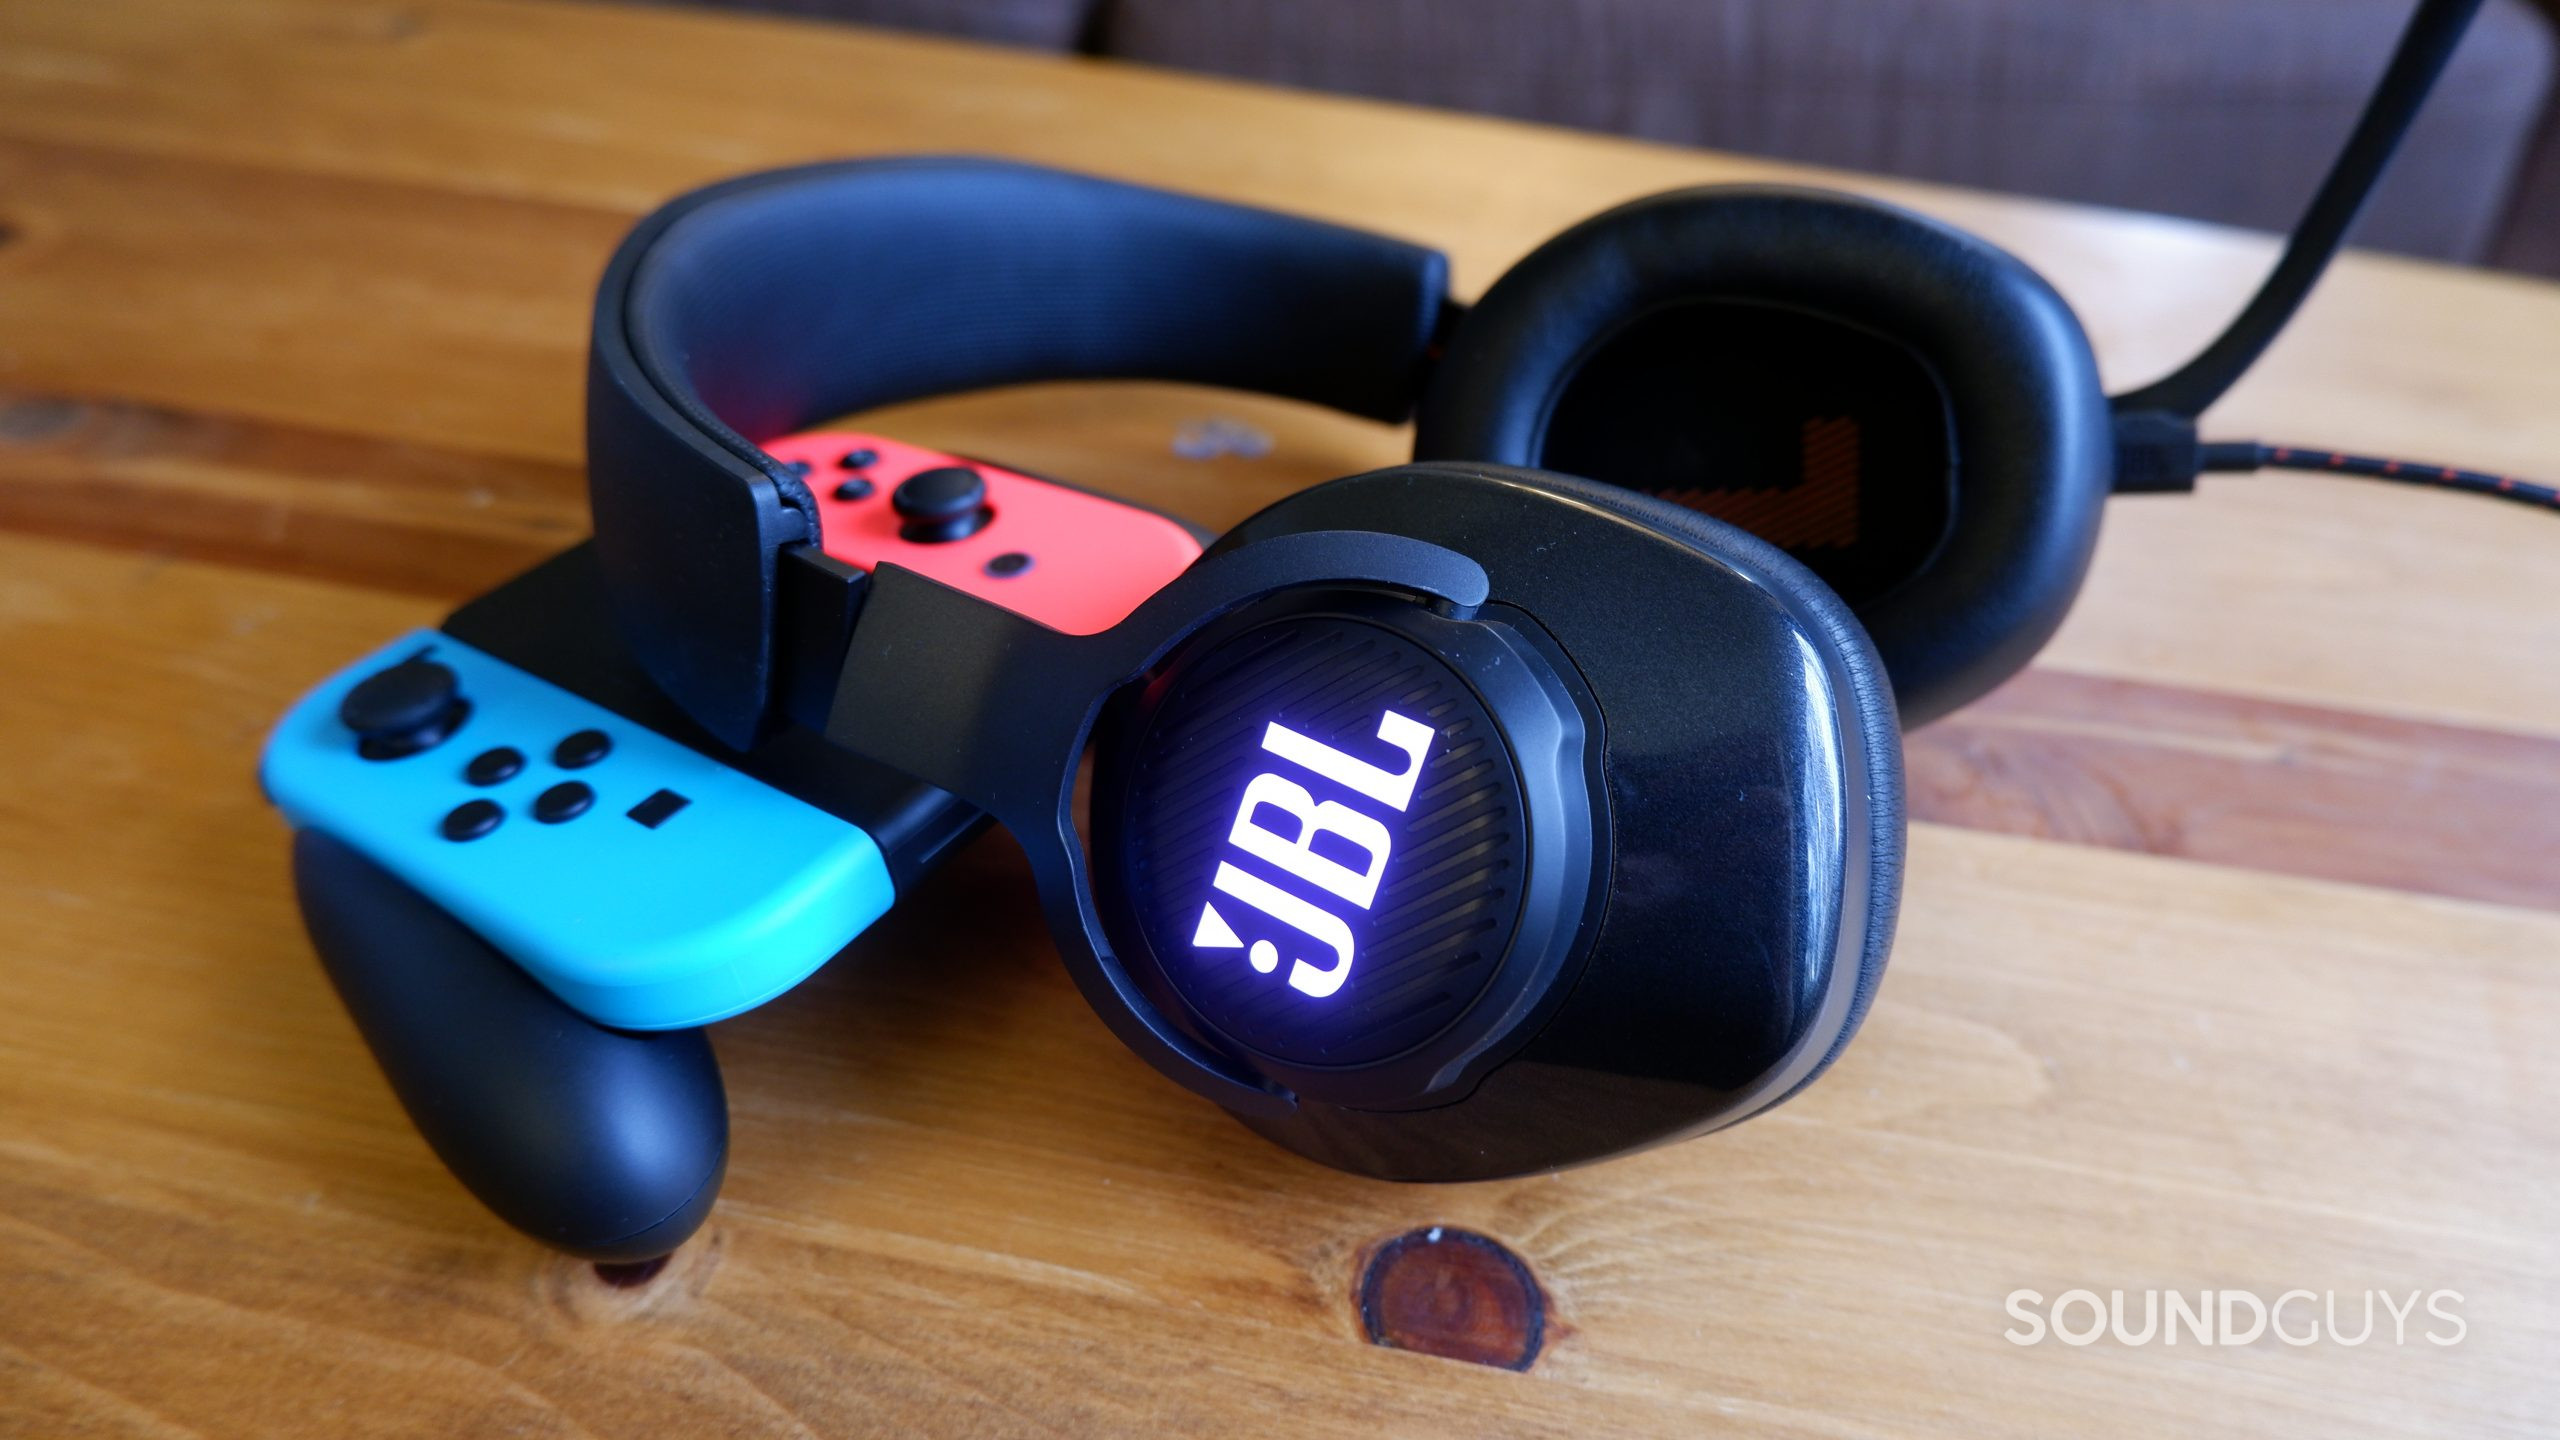 The JBL Quantum 400 headset laying on a wooden coffee table against a Nintendo Switch controller.